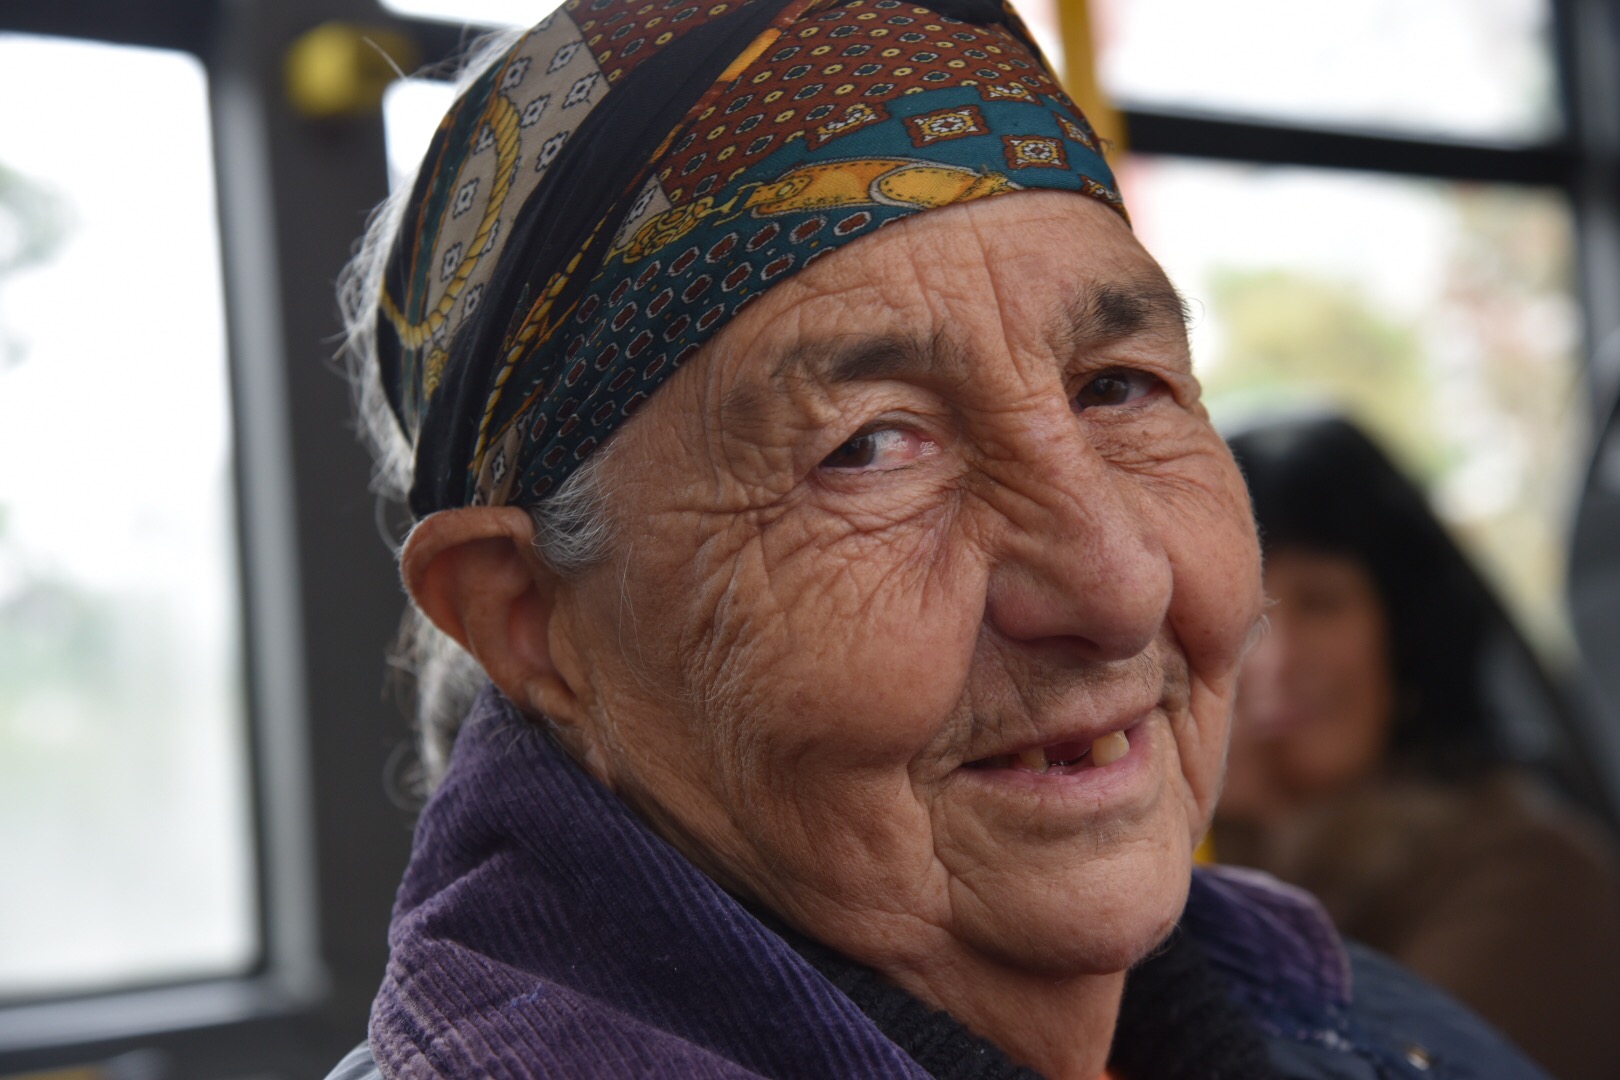 I thought the gypsy lady would give me an advice. I met her at the bus one day on the way to visit my dad in the clinic. Instead, the gypsy just turned and smiled at me. 